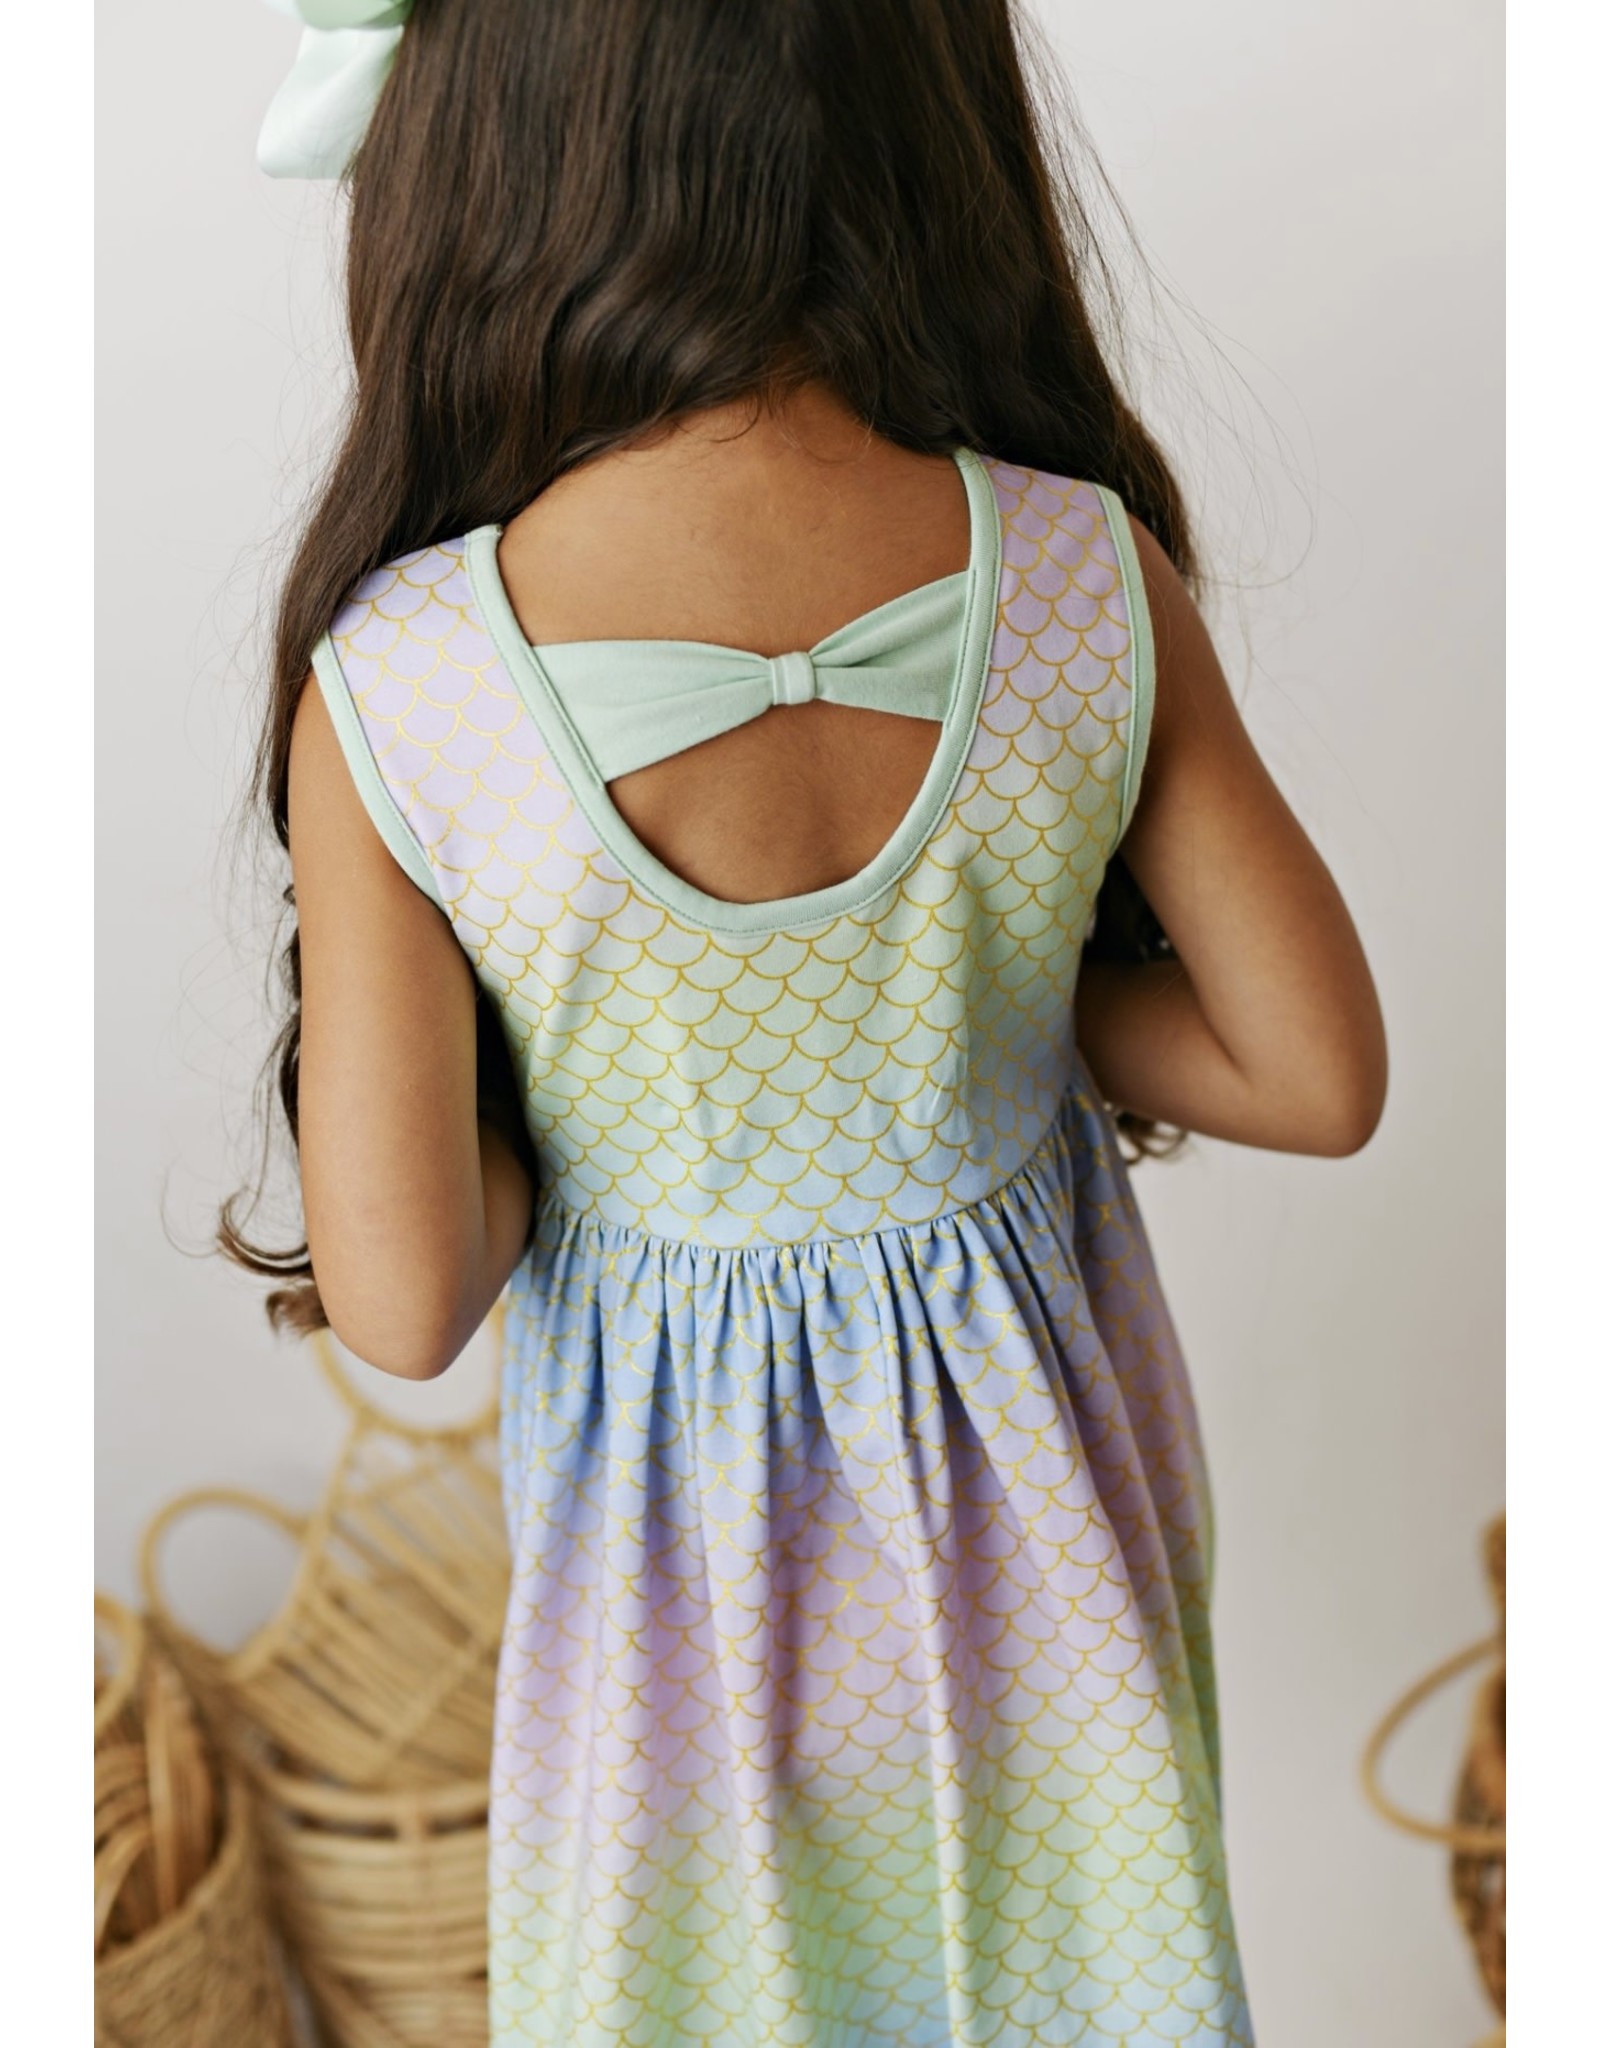 Swoon Baby Swoon Baby- Ombre Under the Sea Peony Bow Dress